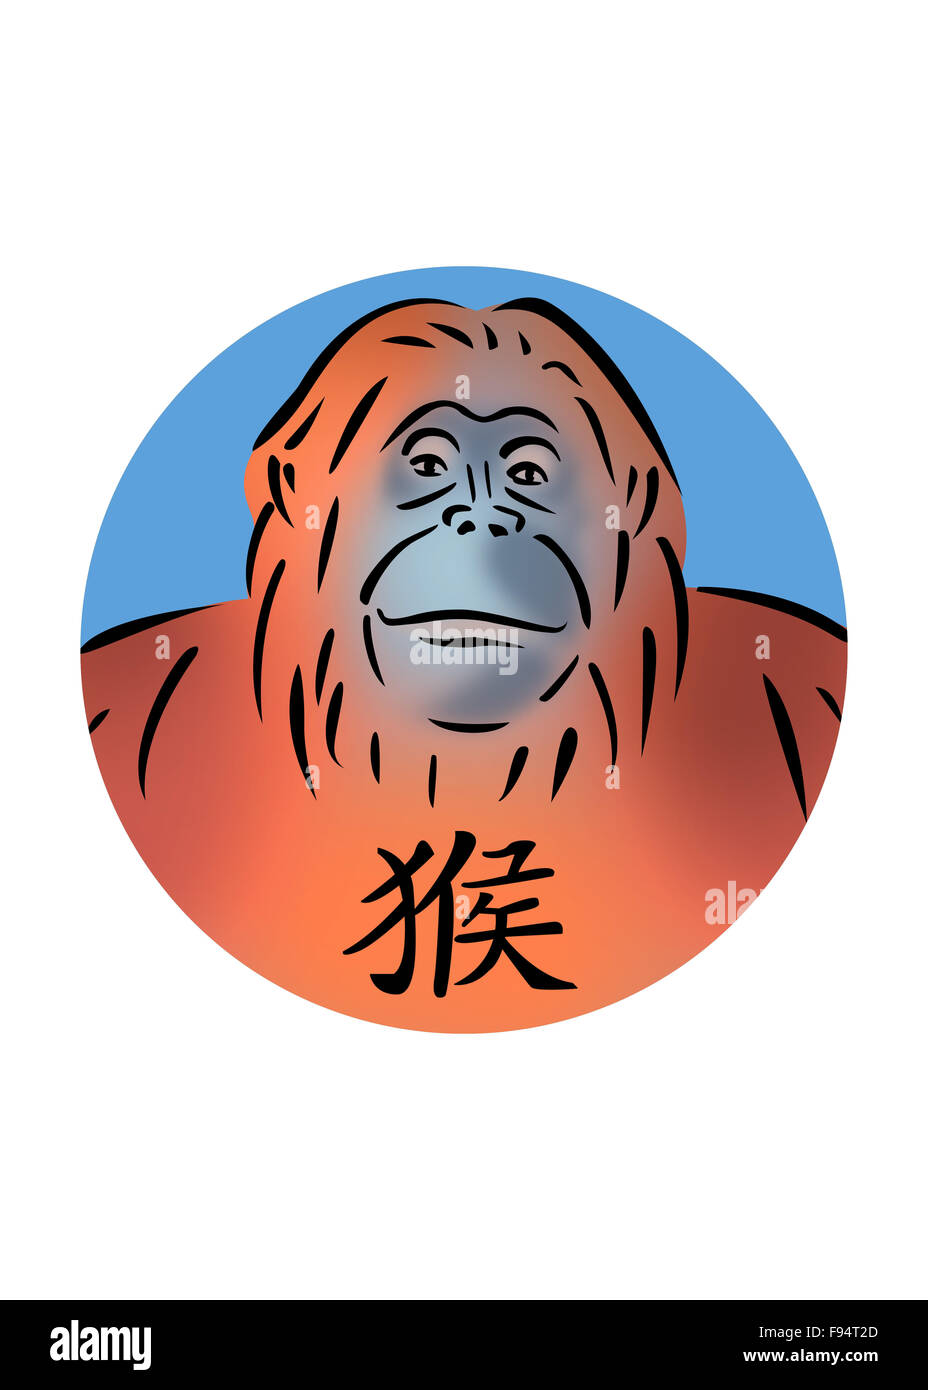 Chinese zodiac sign for year of the monkey featuring illustration of orangutan Stock Photo